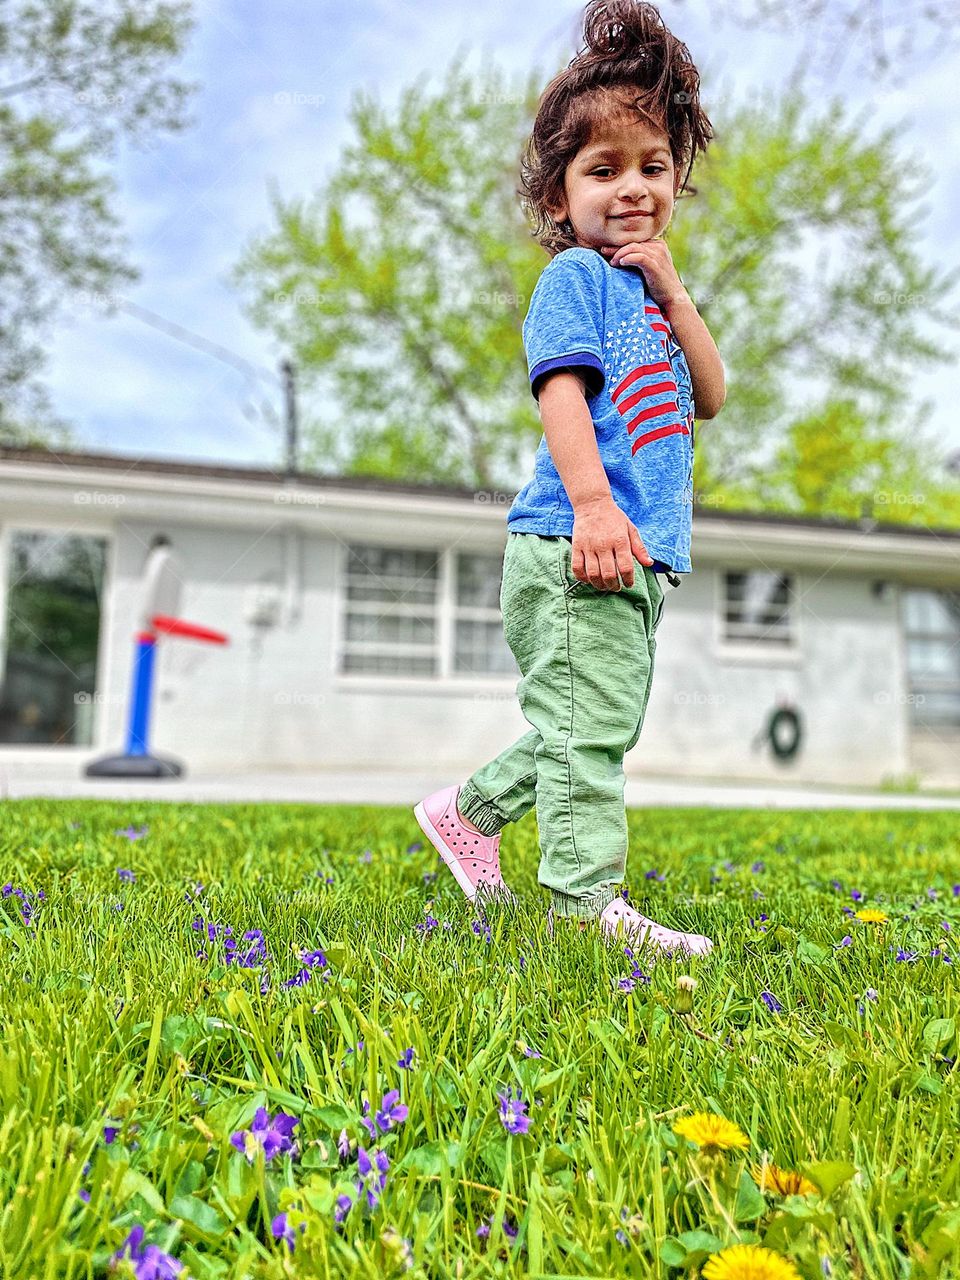 Toddler girl acting like a model in backyard, toddler being silly outside, toddler has fun in the lawn, springtime in Ohio, low perspective 